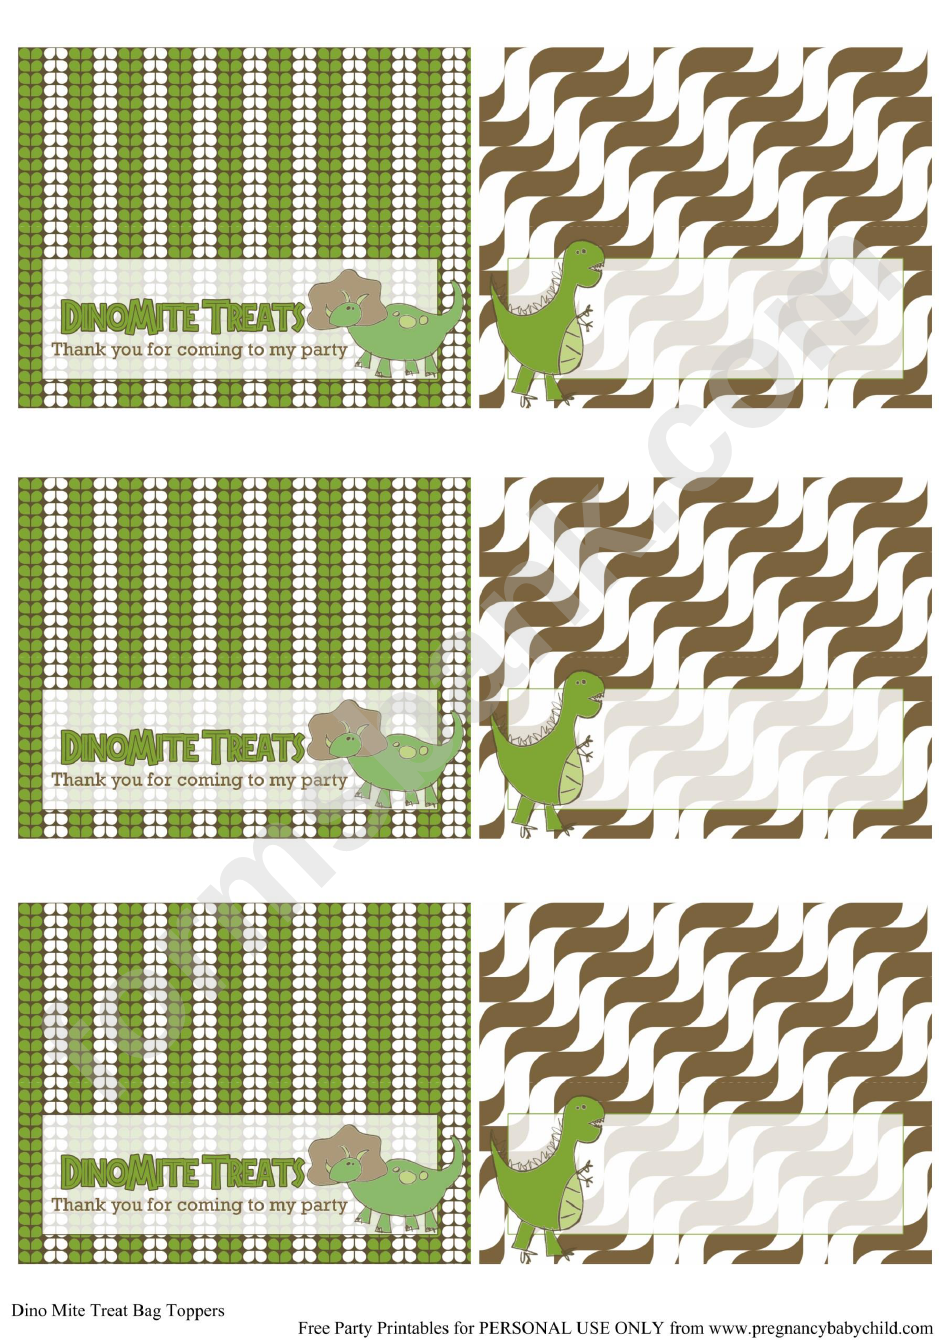 Dino Mite Treat Bag Toppers Template